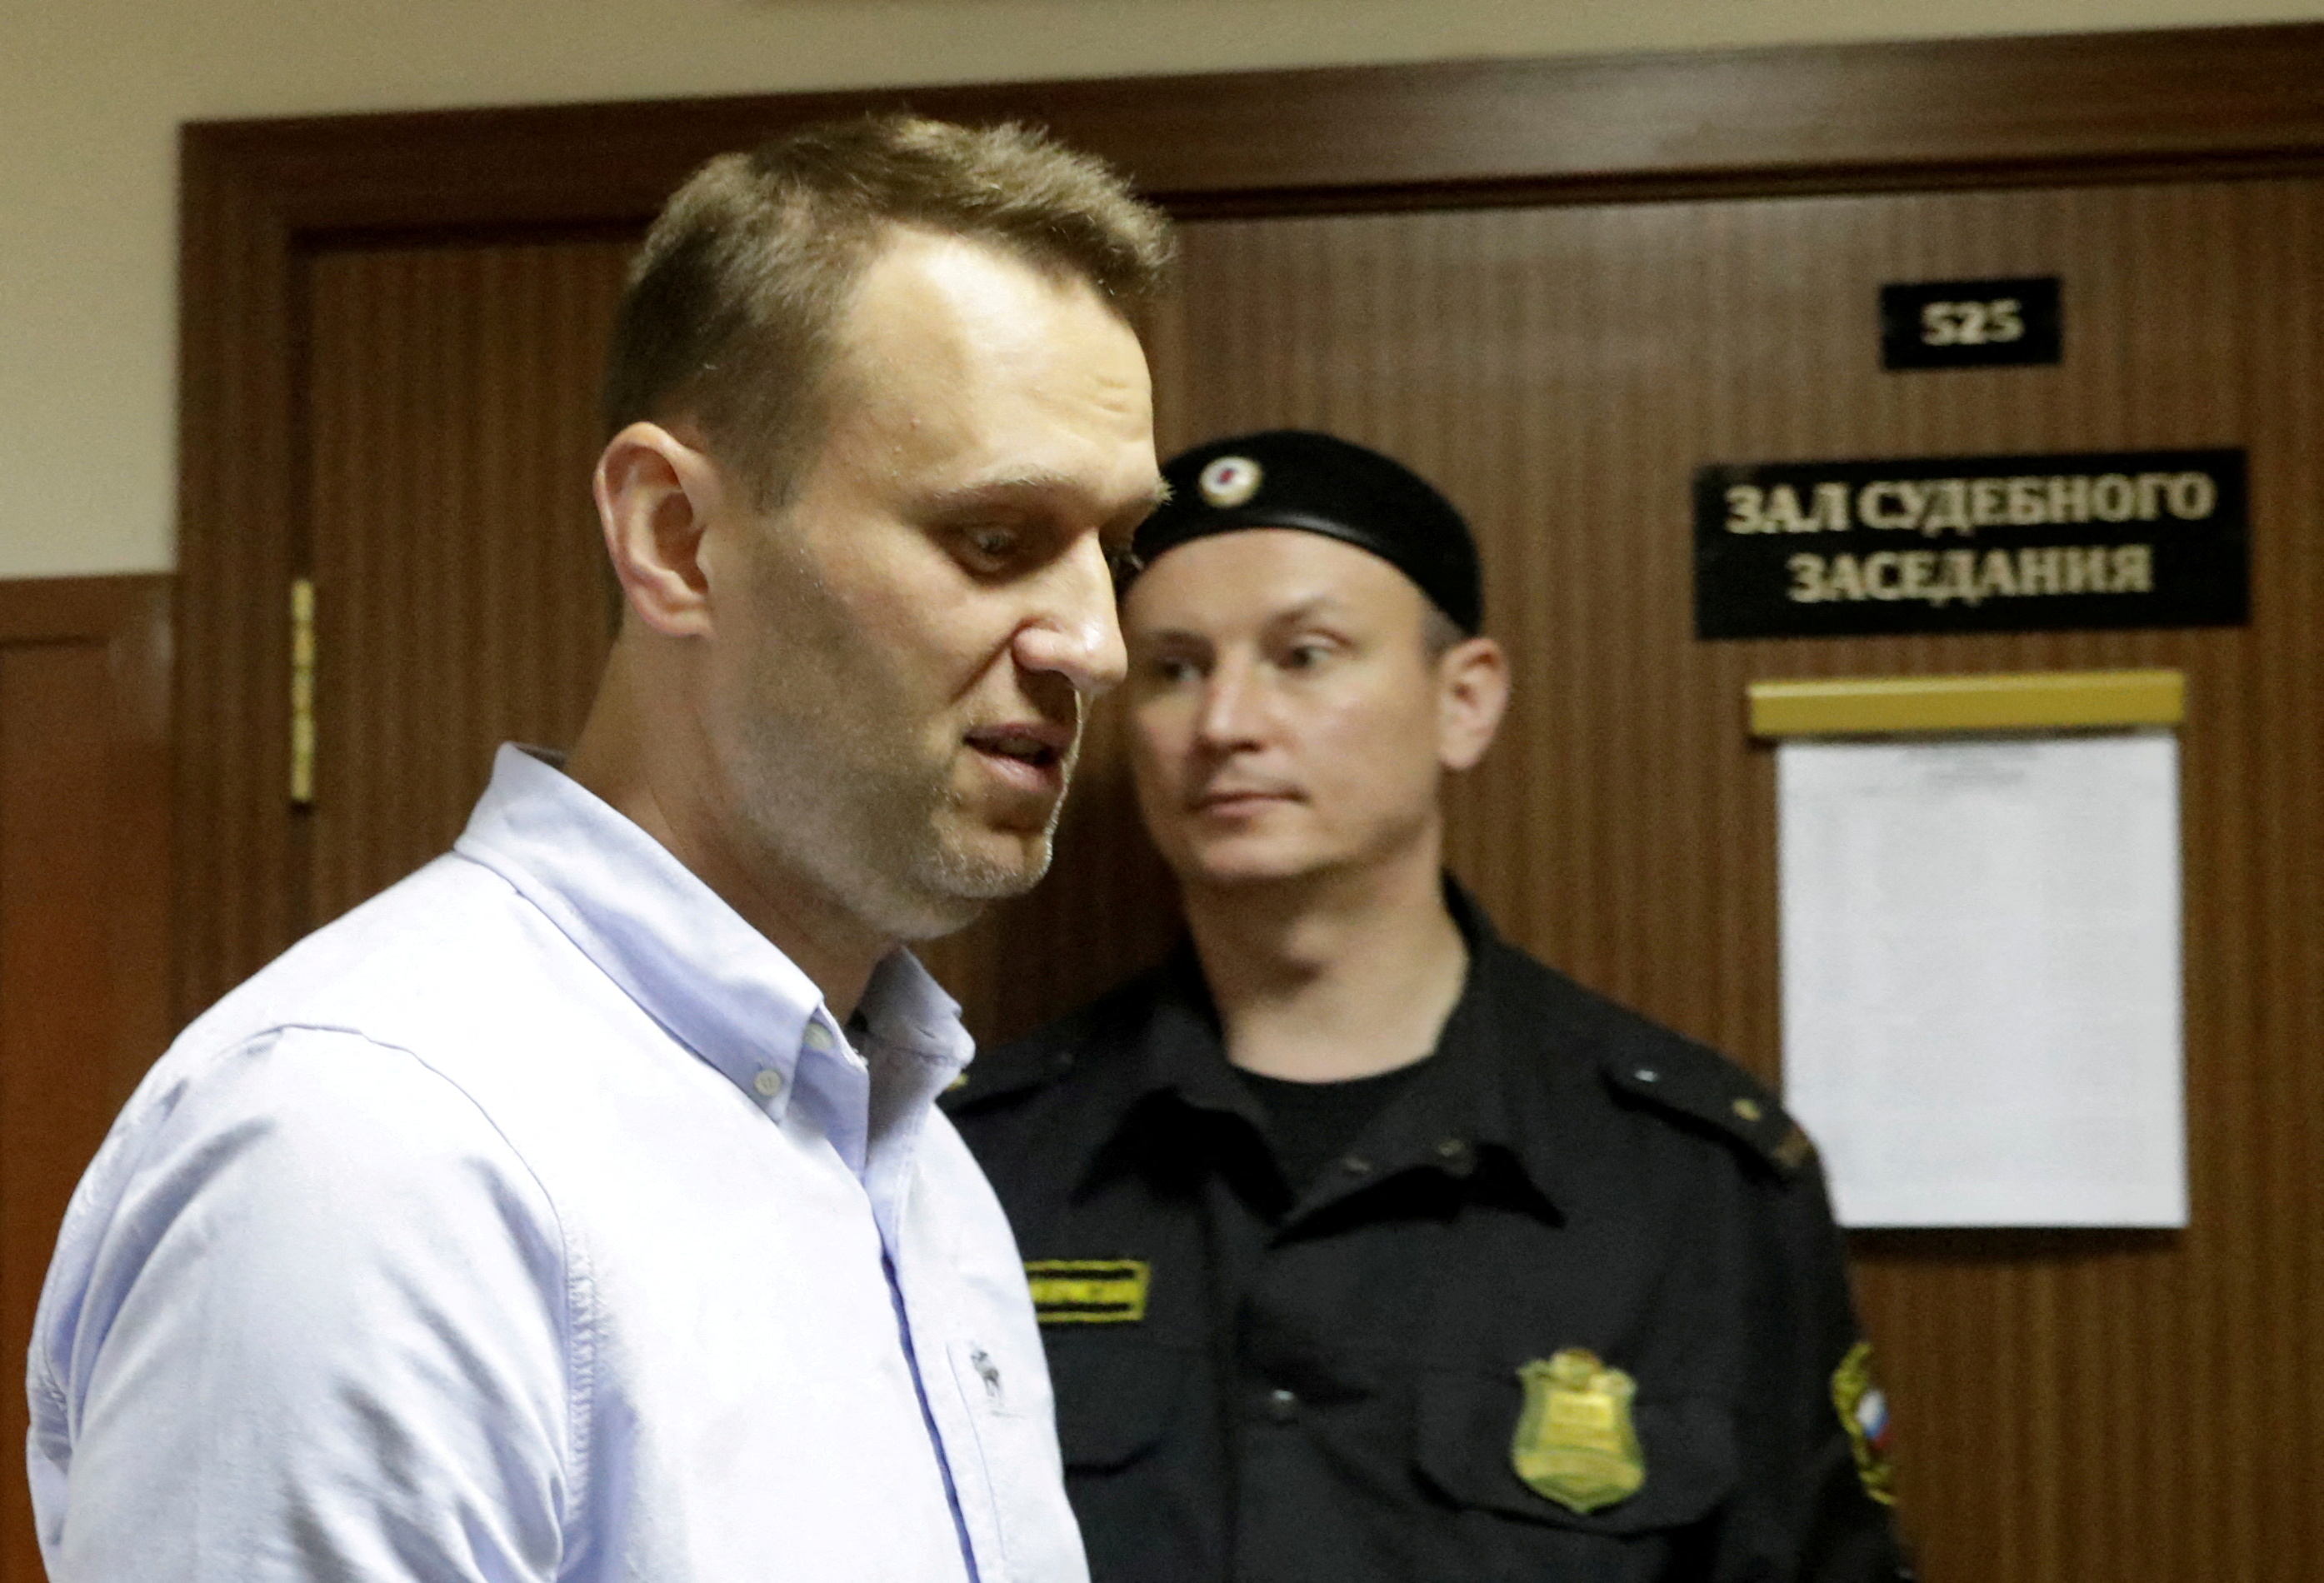 Russian opposition leader Alexei Navalny arrives for a hearing for his appeal at a court in Moscow